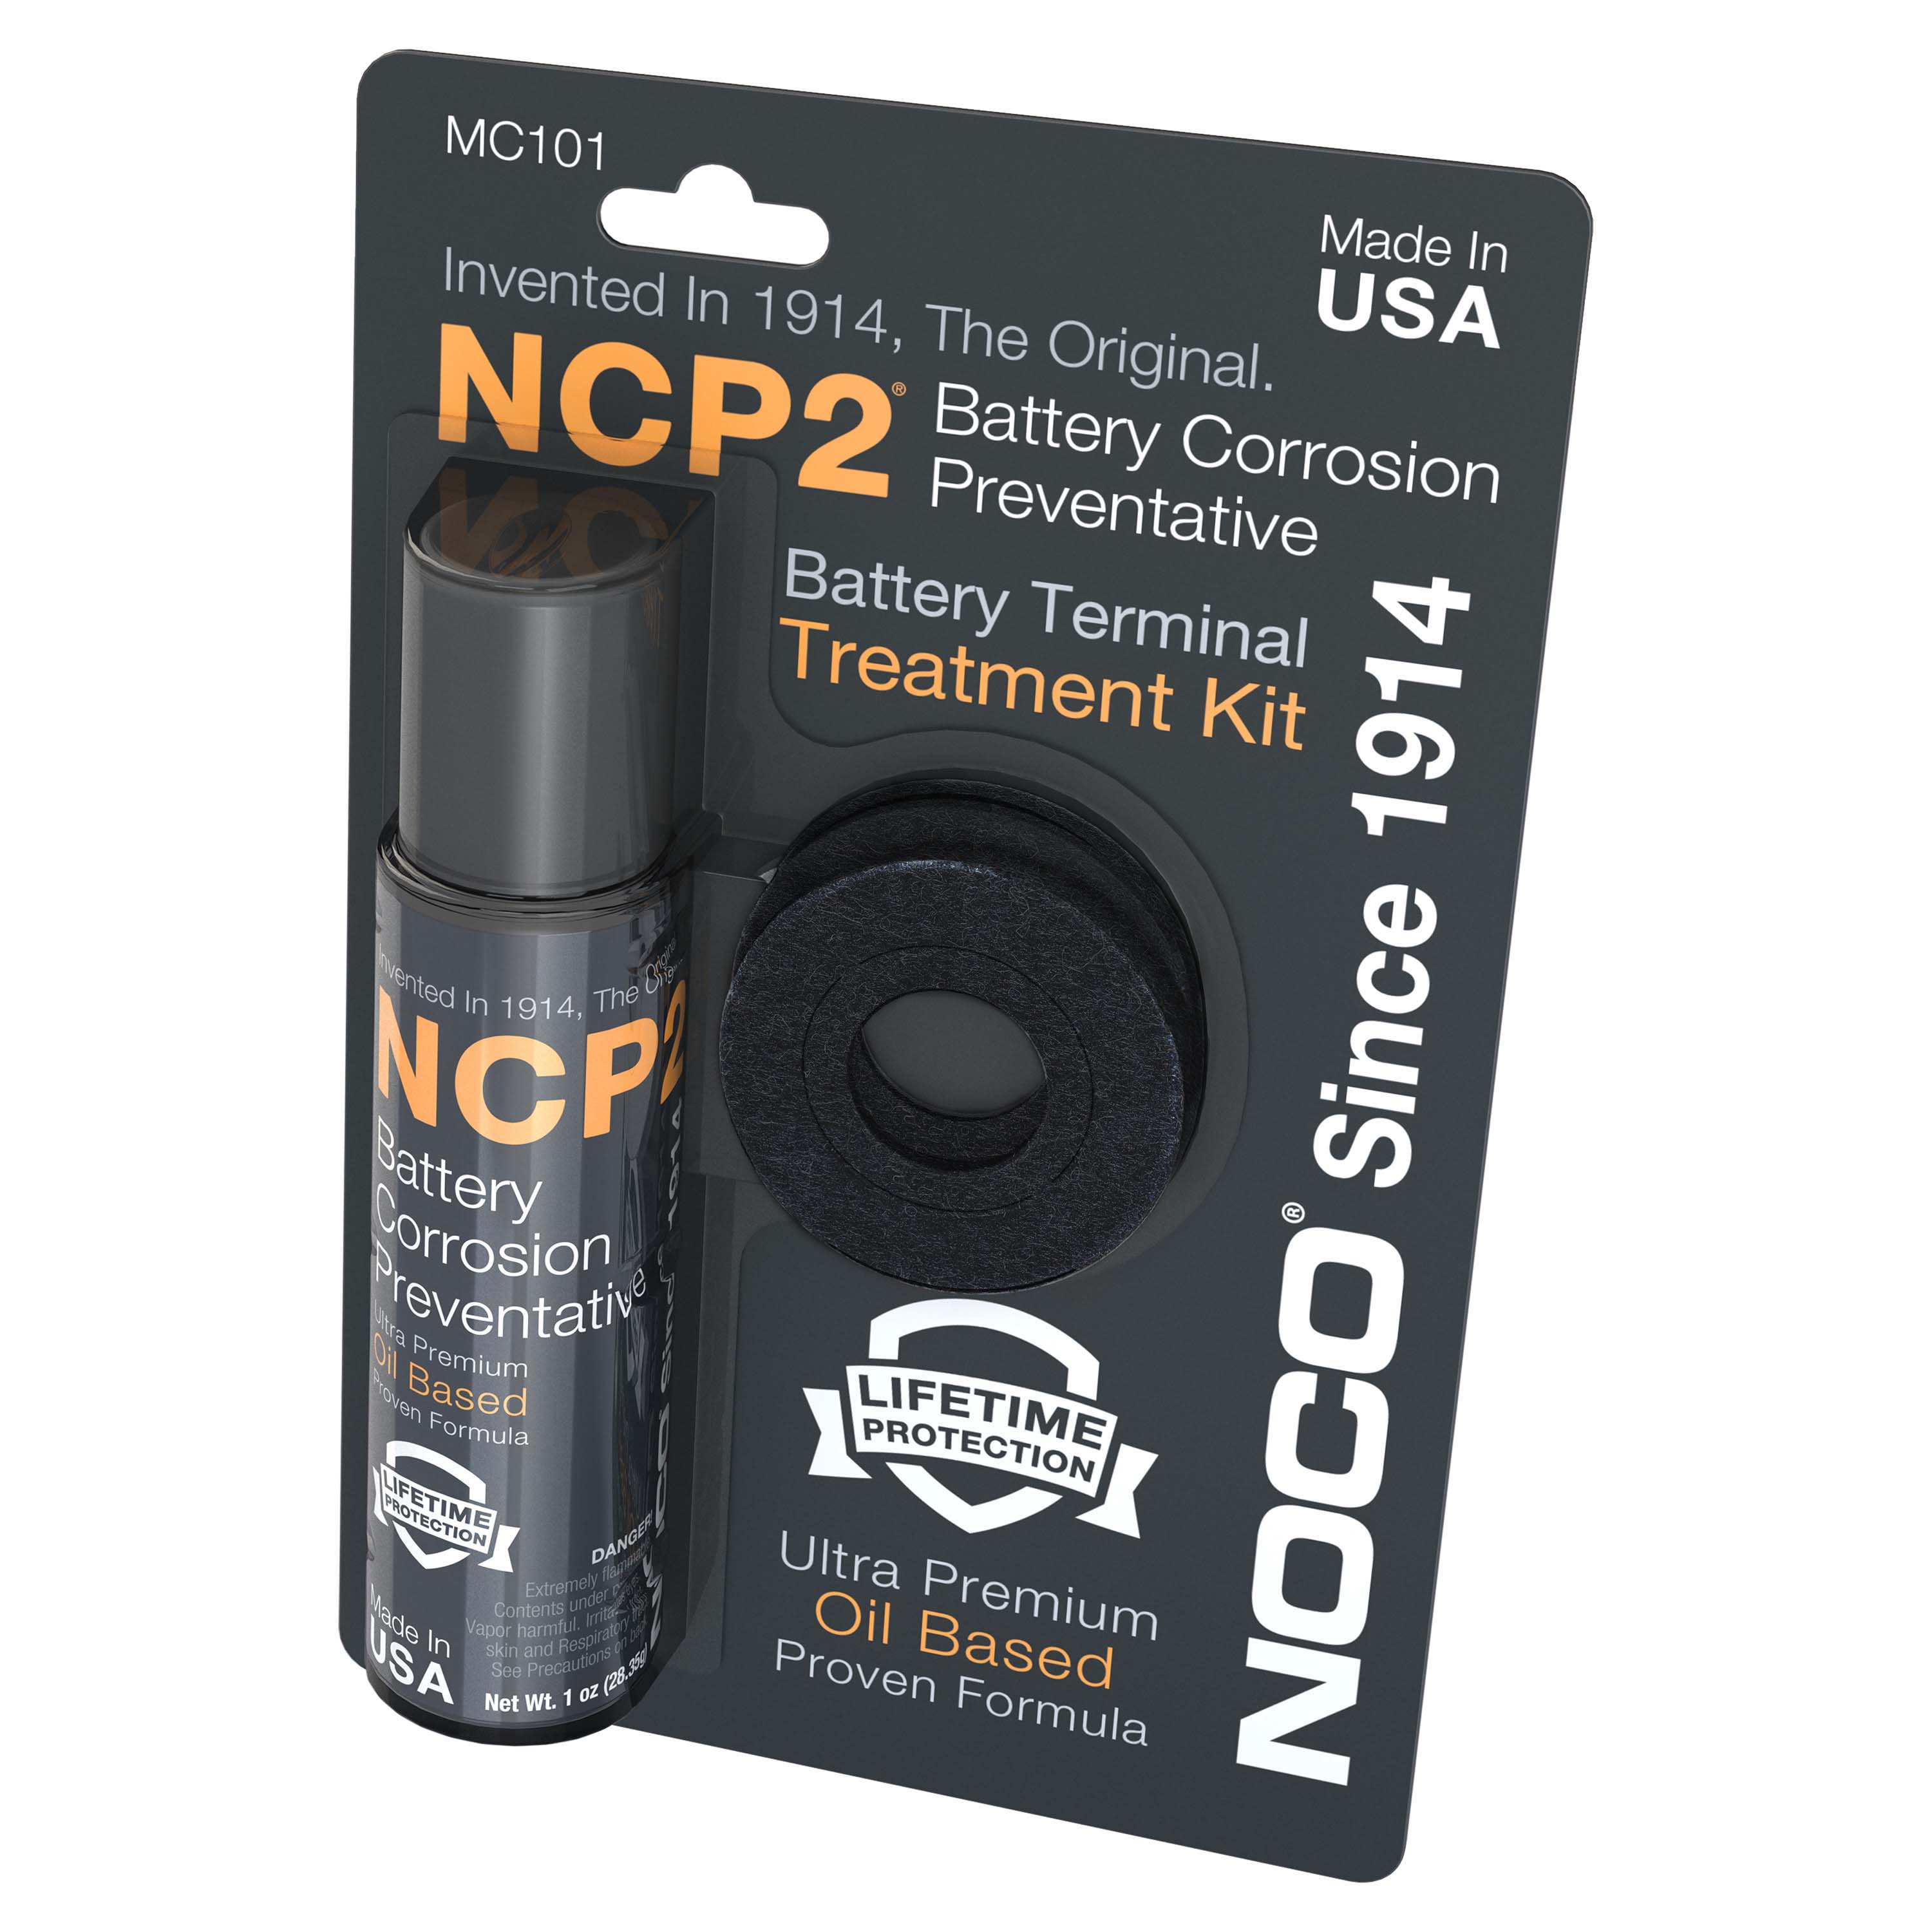 NOCO NCP2 MC101 Battery Terminal Treatment Kit - image 2 of 4